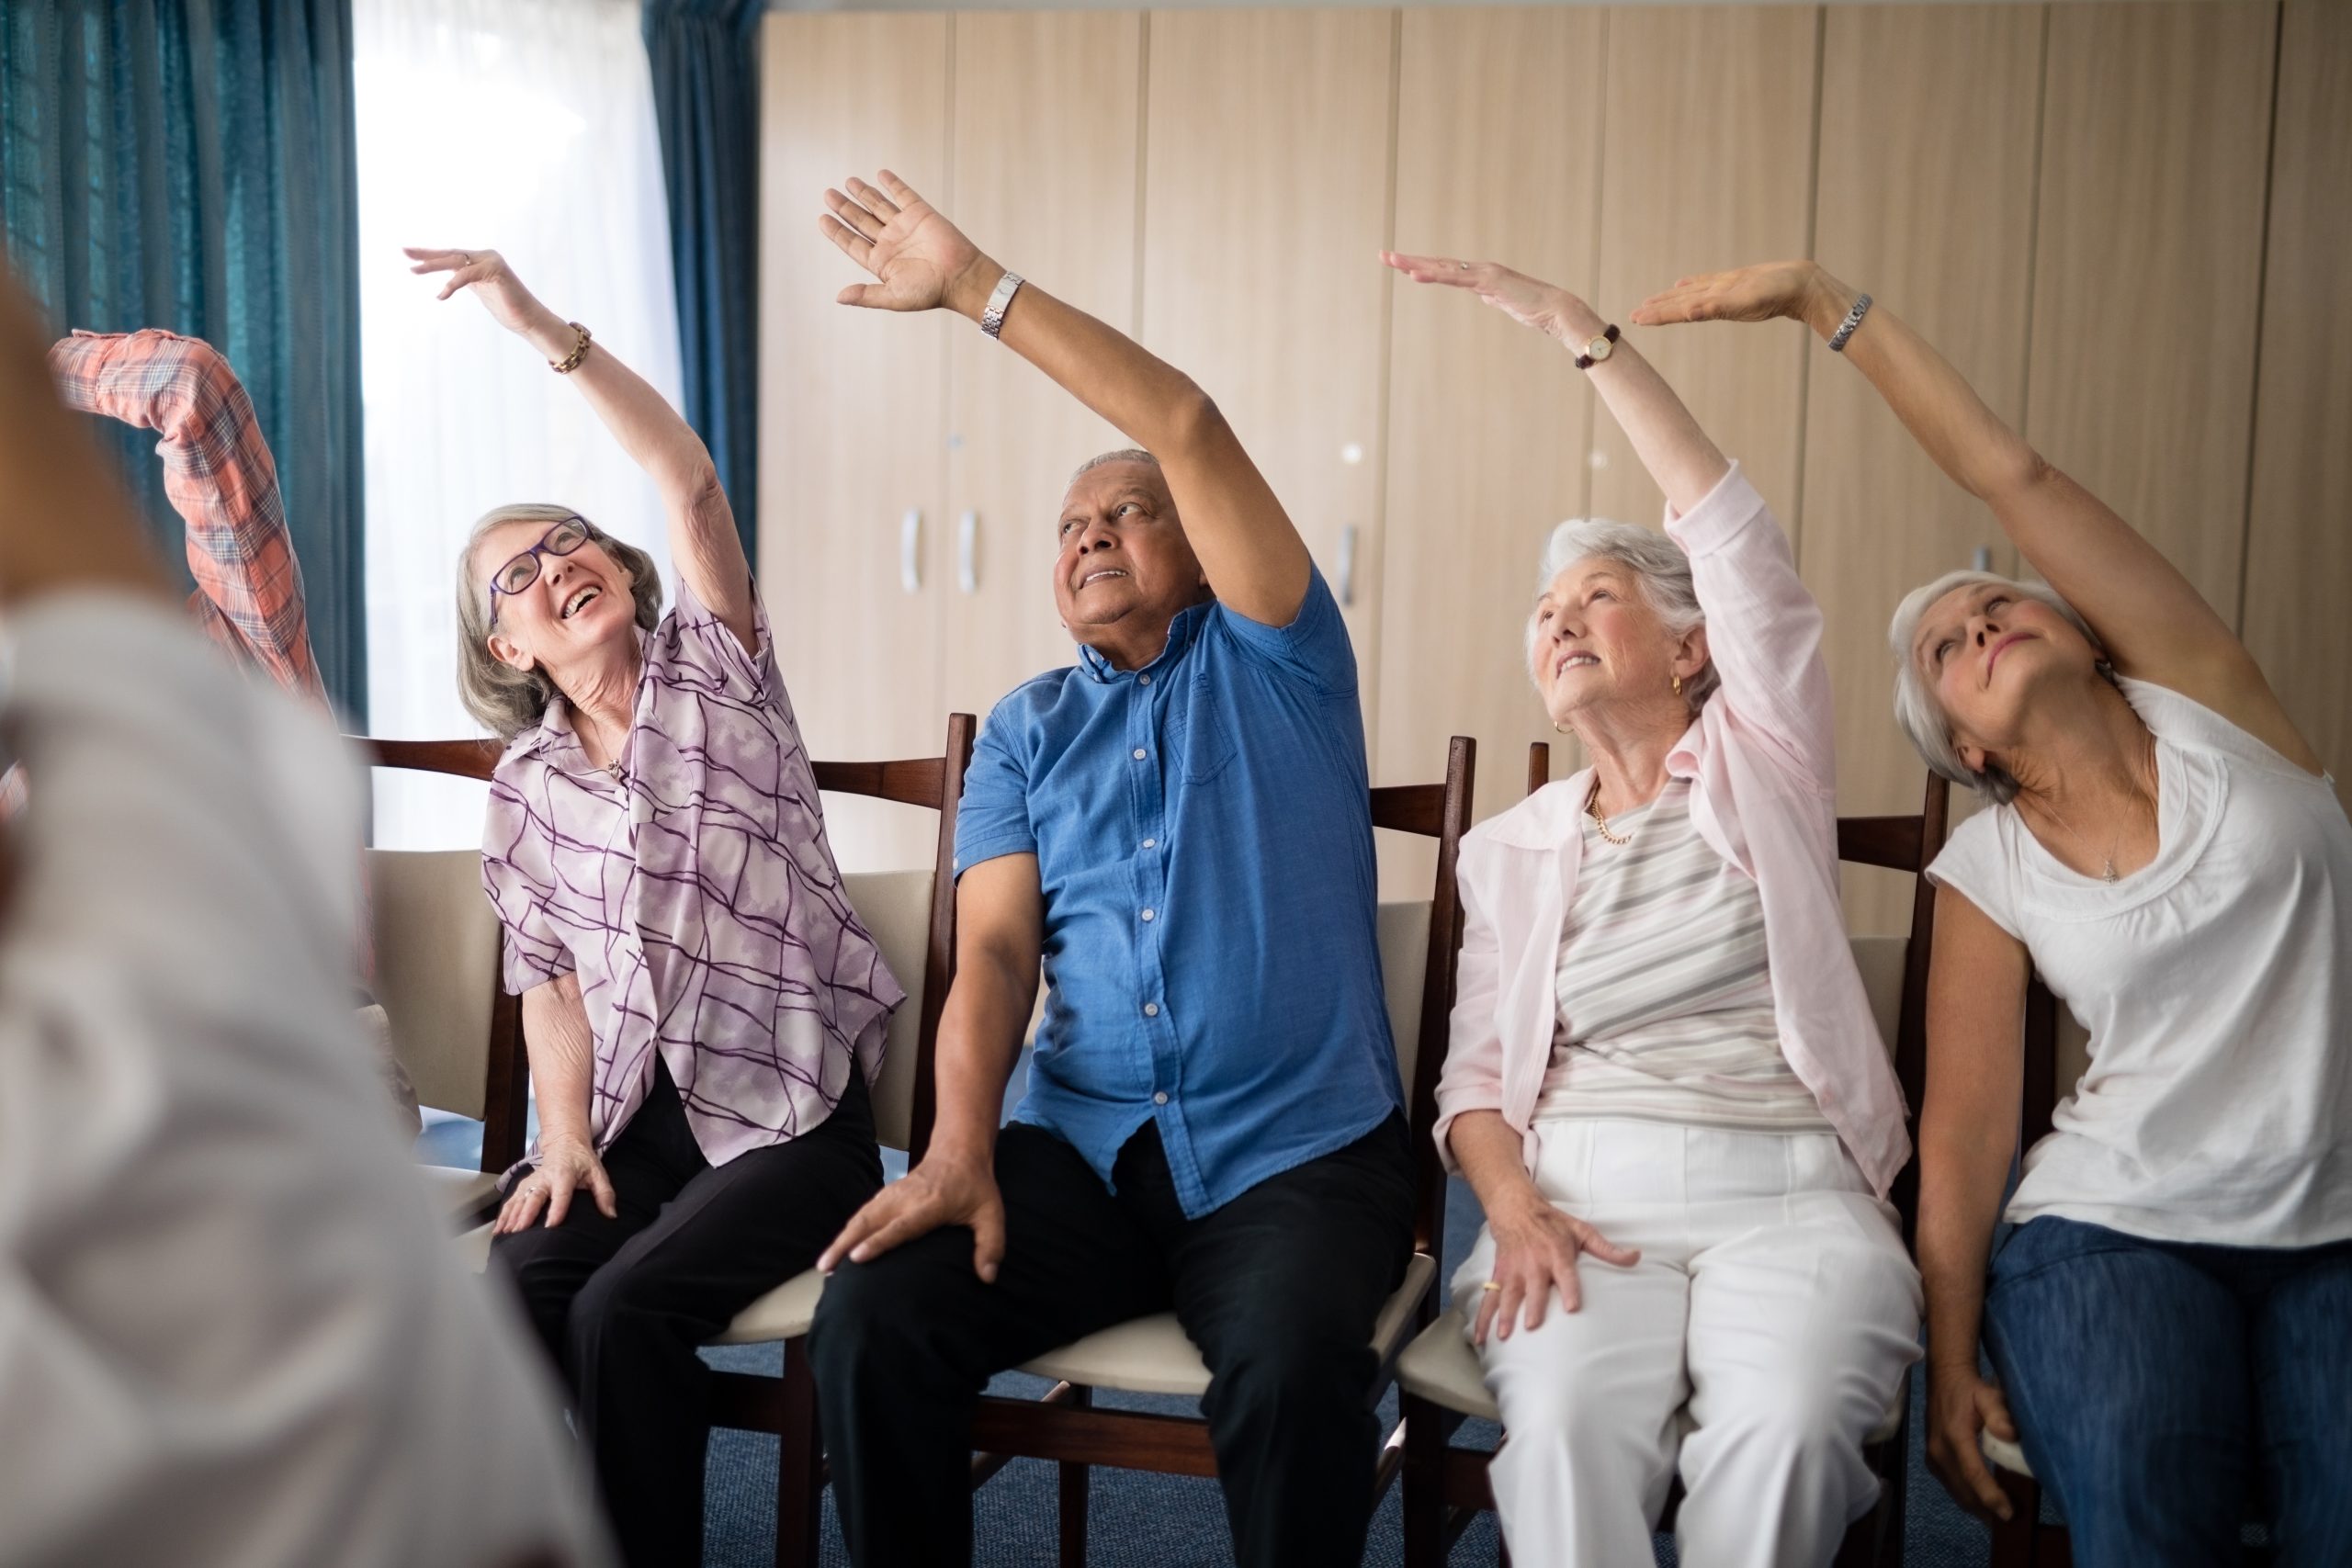 Falls Prevention Week: Keep Yourself Safe From Falls